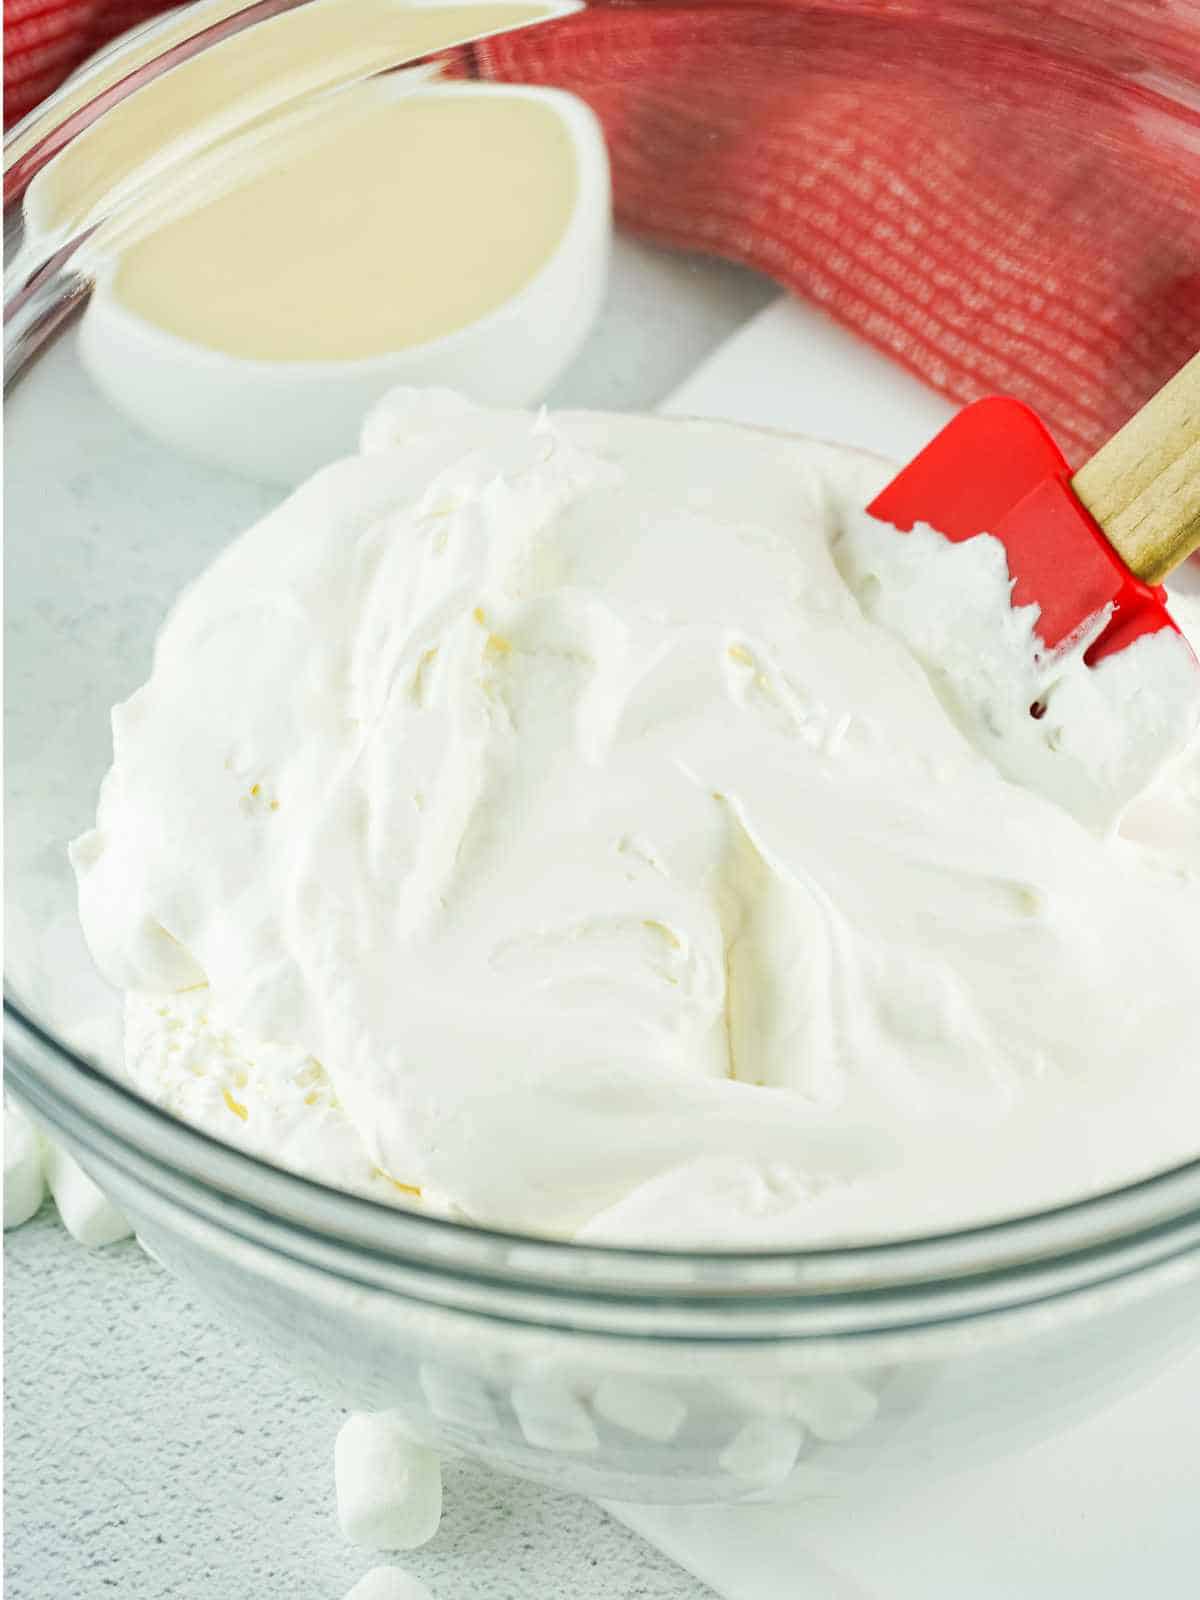 mixing whipped cream with shredded coconut.